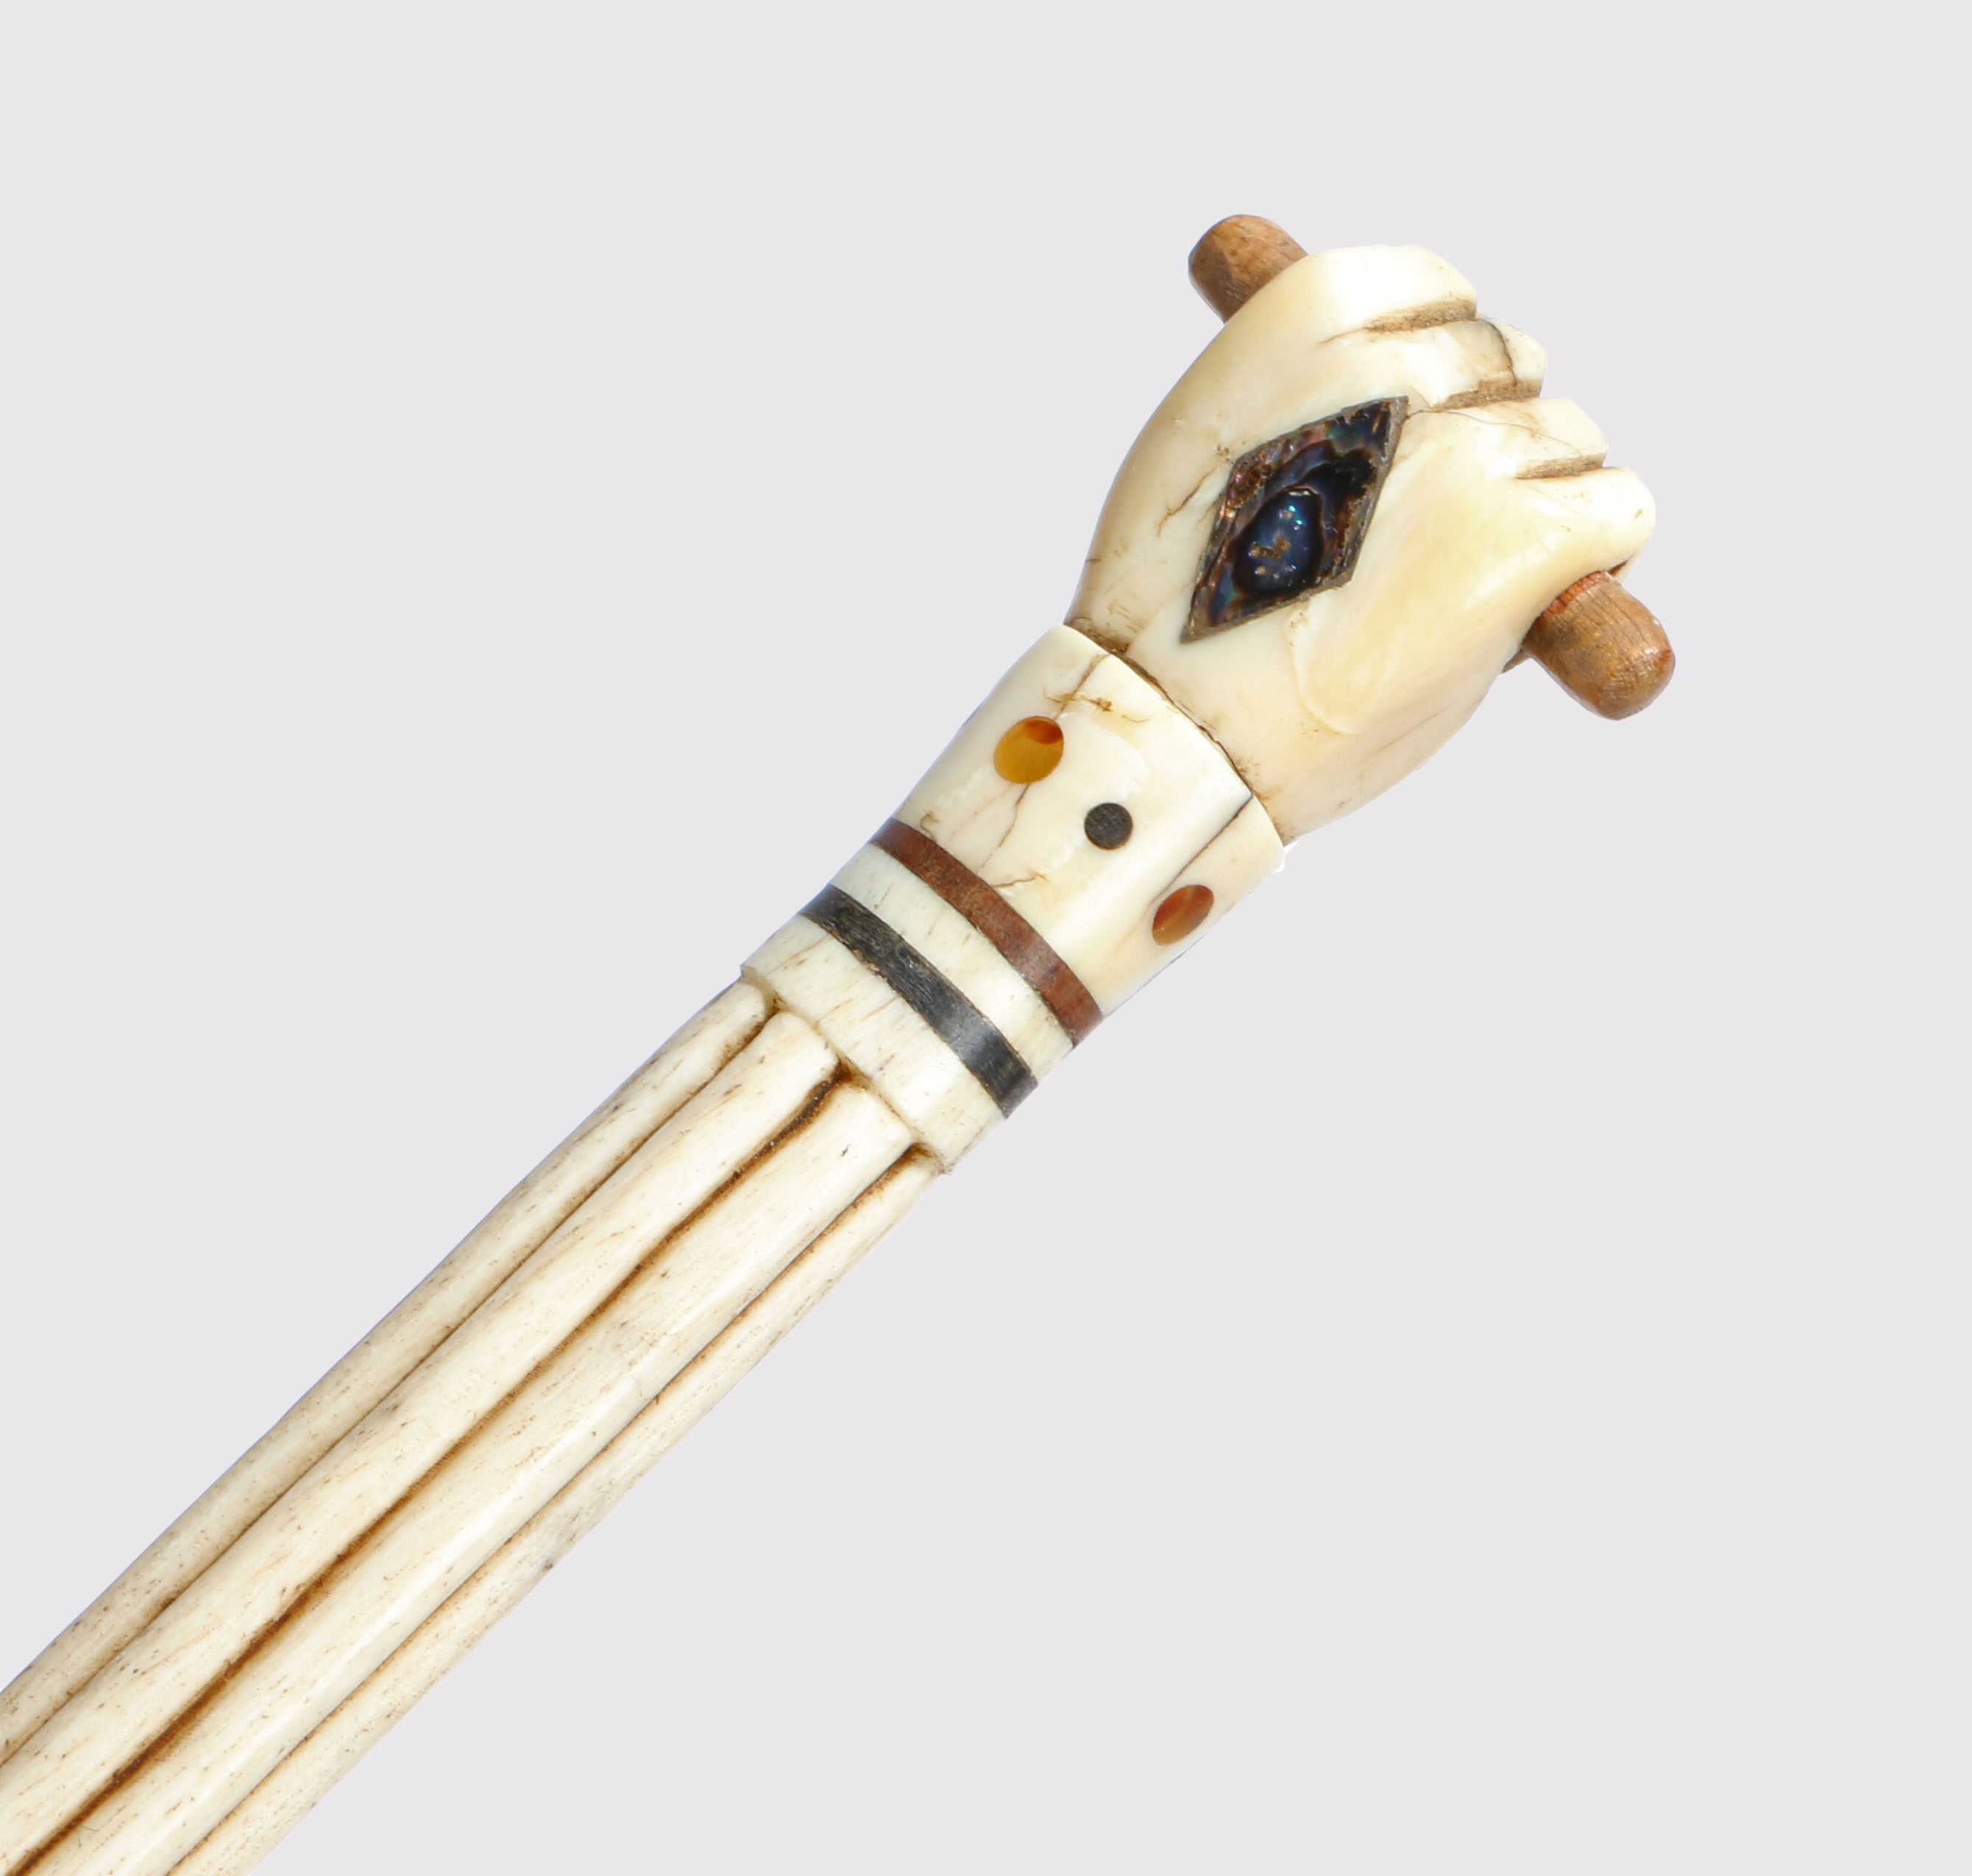 A George III whalebone and baleen walking stick, the handle in the form of a clenched fist holding a